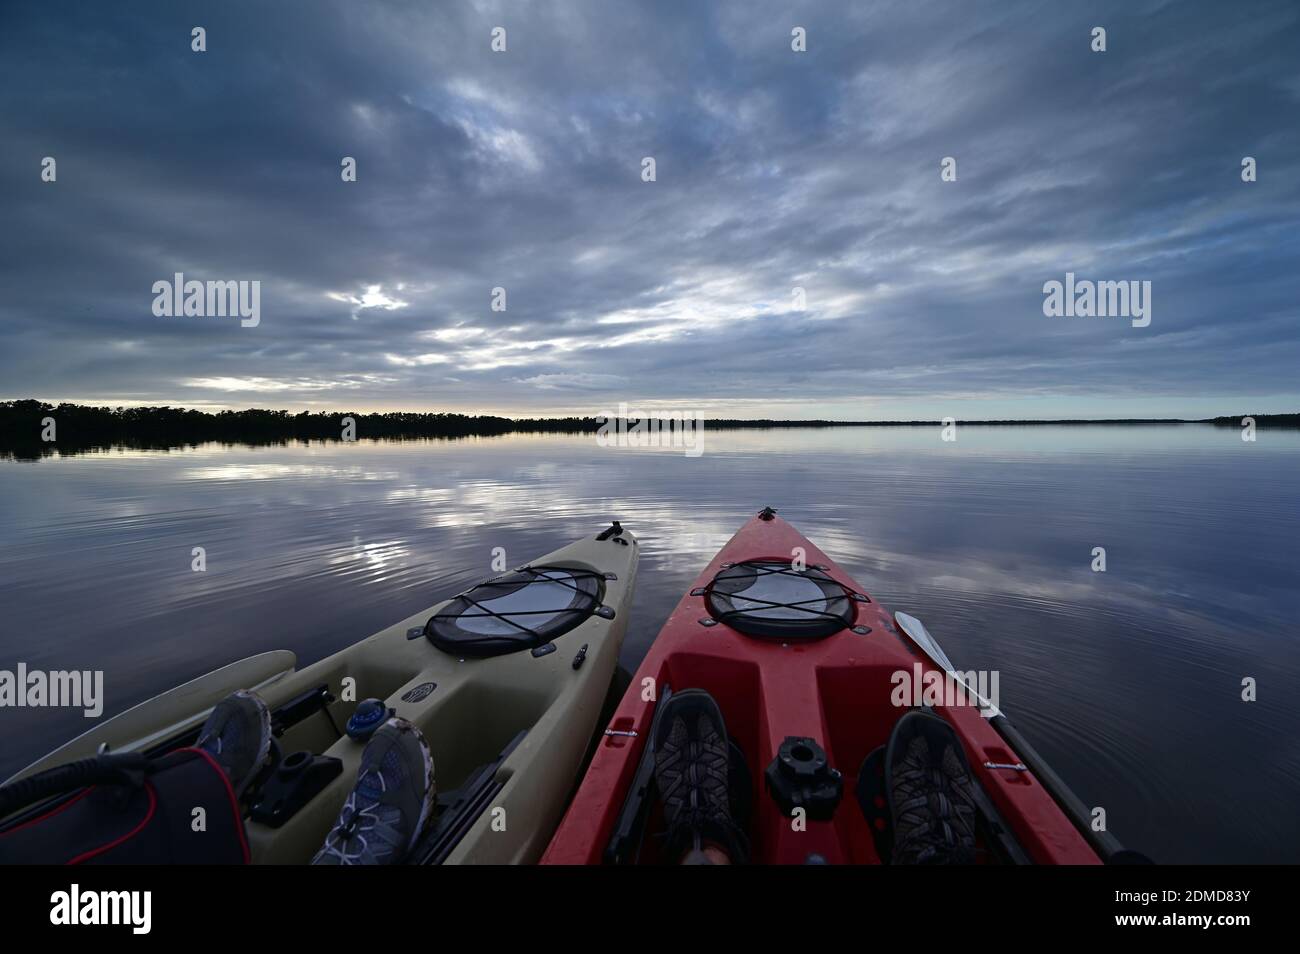 Everglades National Park, Florida - December 12, 2020 - Two kayaks at sunset on Coot Bay under dramatic winter cloudscape reflected in tranquil water. Stock Photo